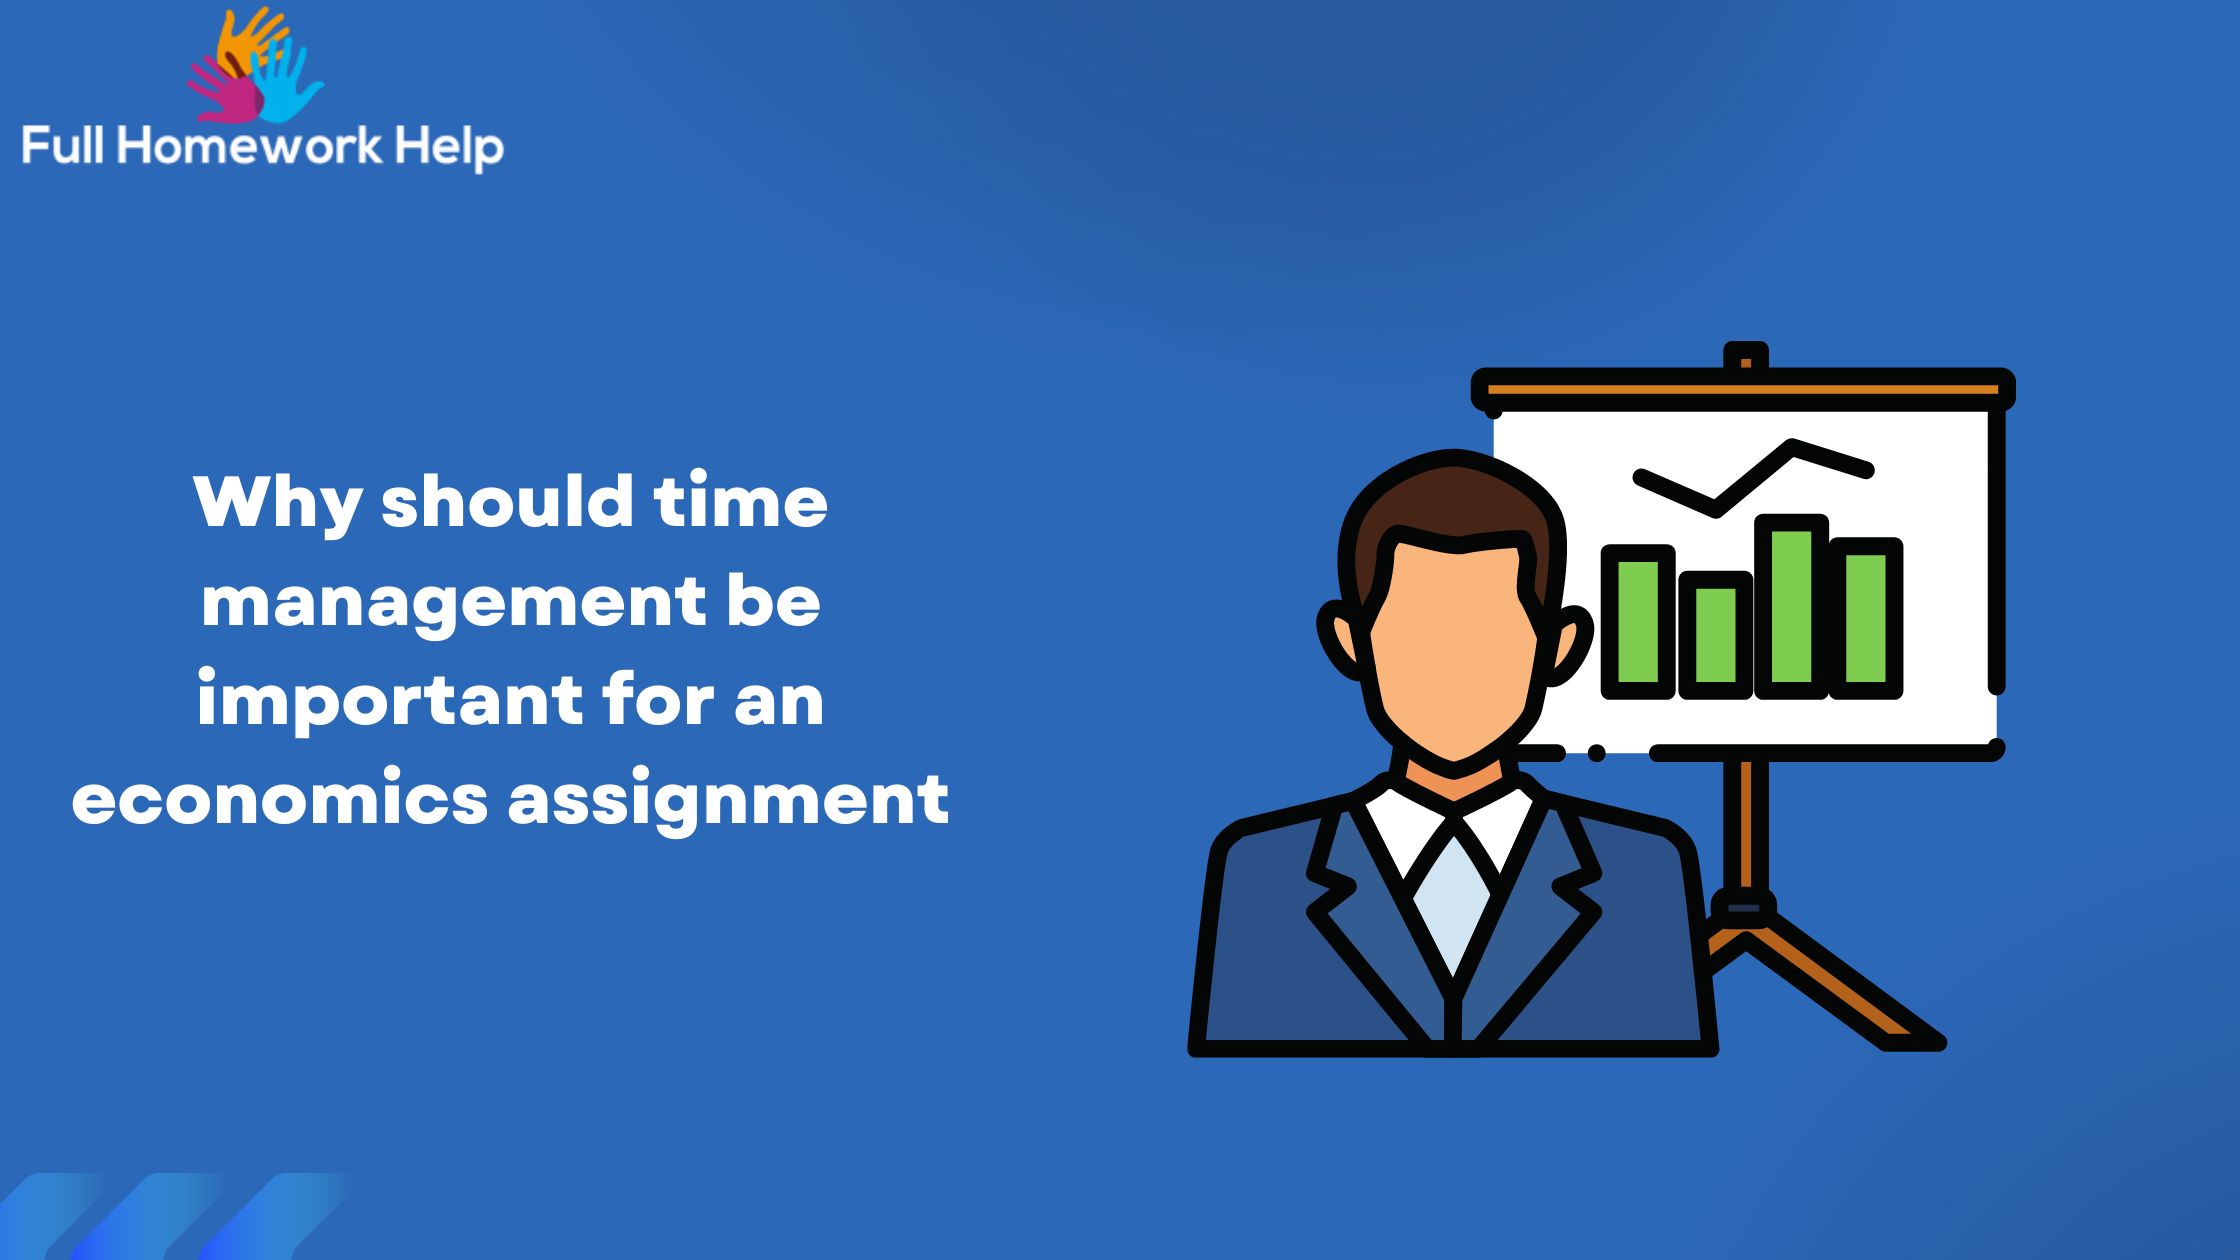 Why should time management be important for an economics assignment